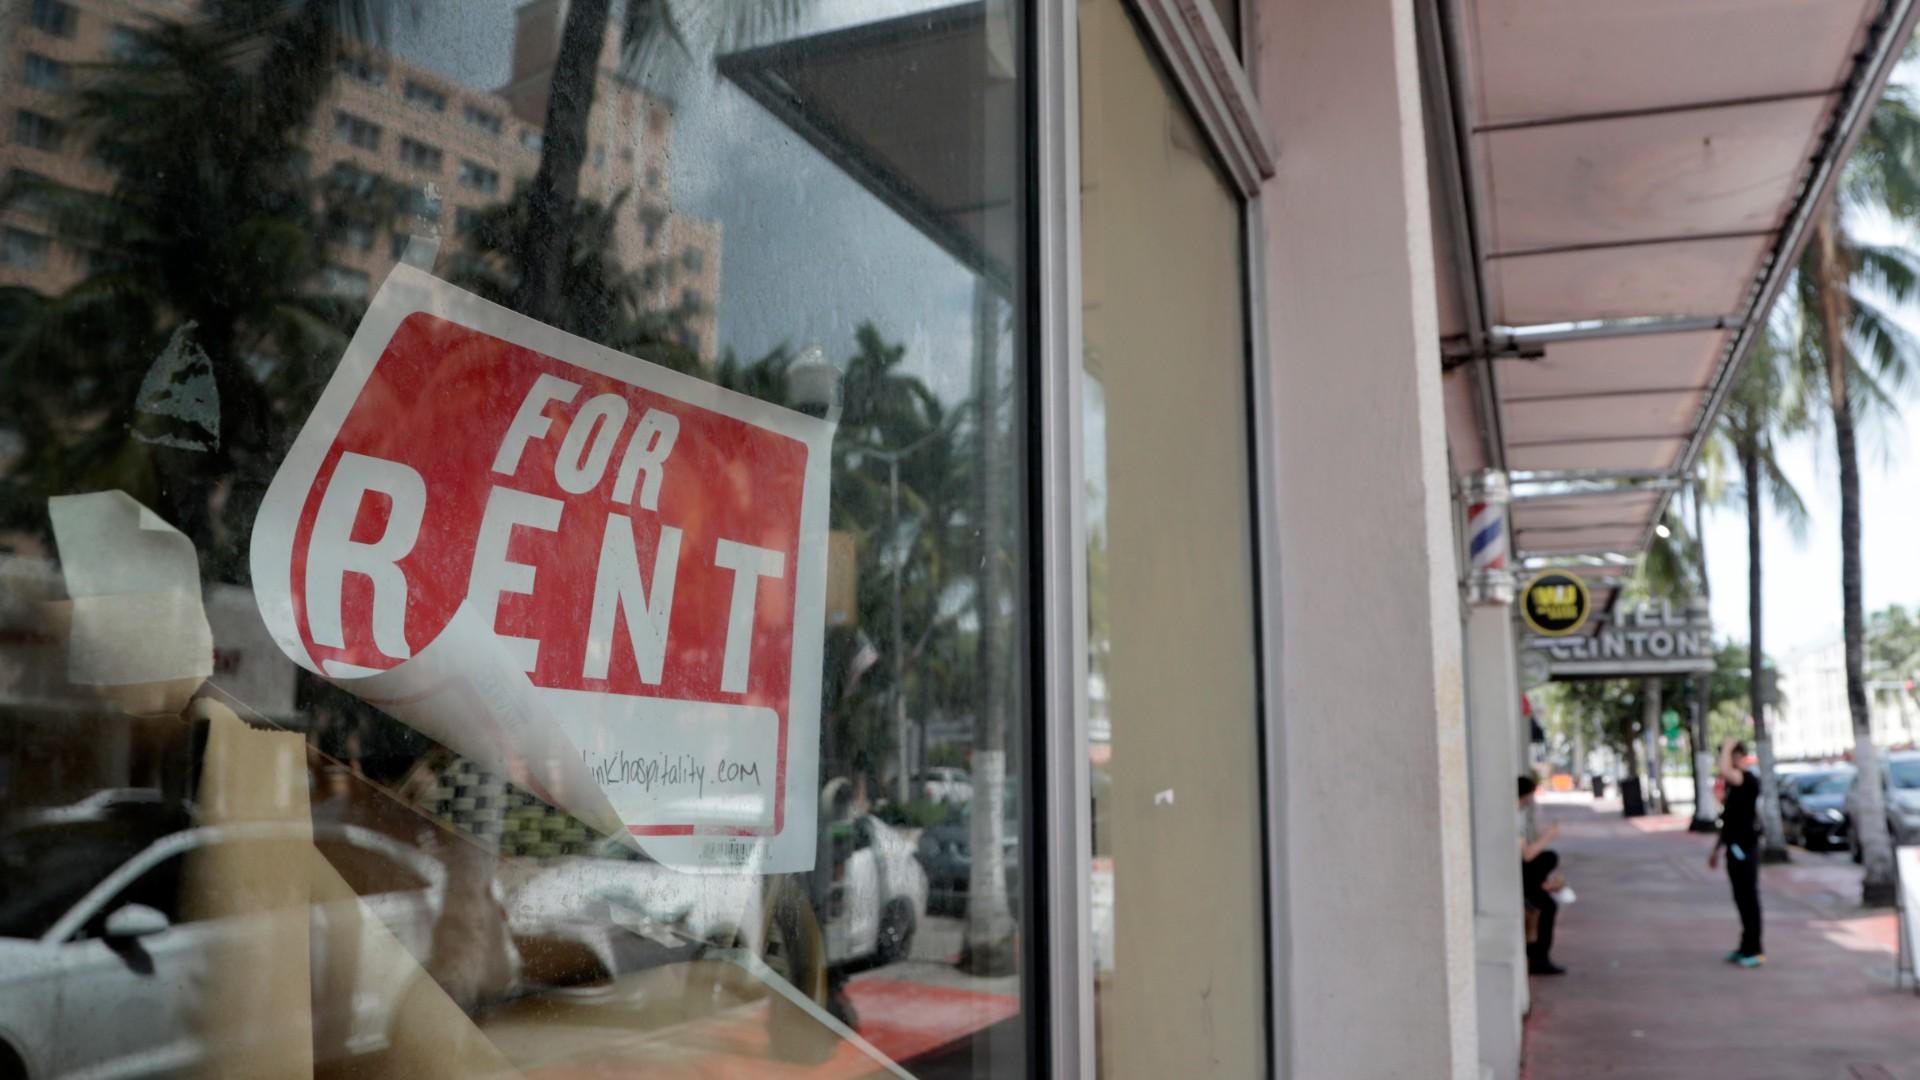 In this July 13, 2020 file photo, a For Rent sign hangs on a closed shop during the coronavirus pandemic in Miami Beach, Fla. (AP Photo / Lynne Sladky)